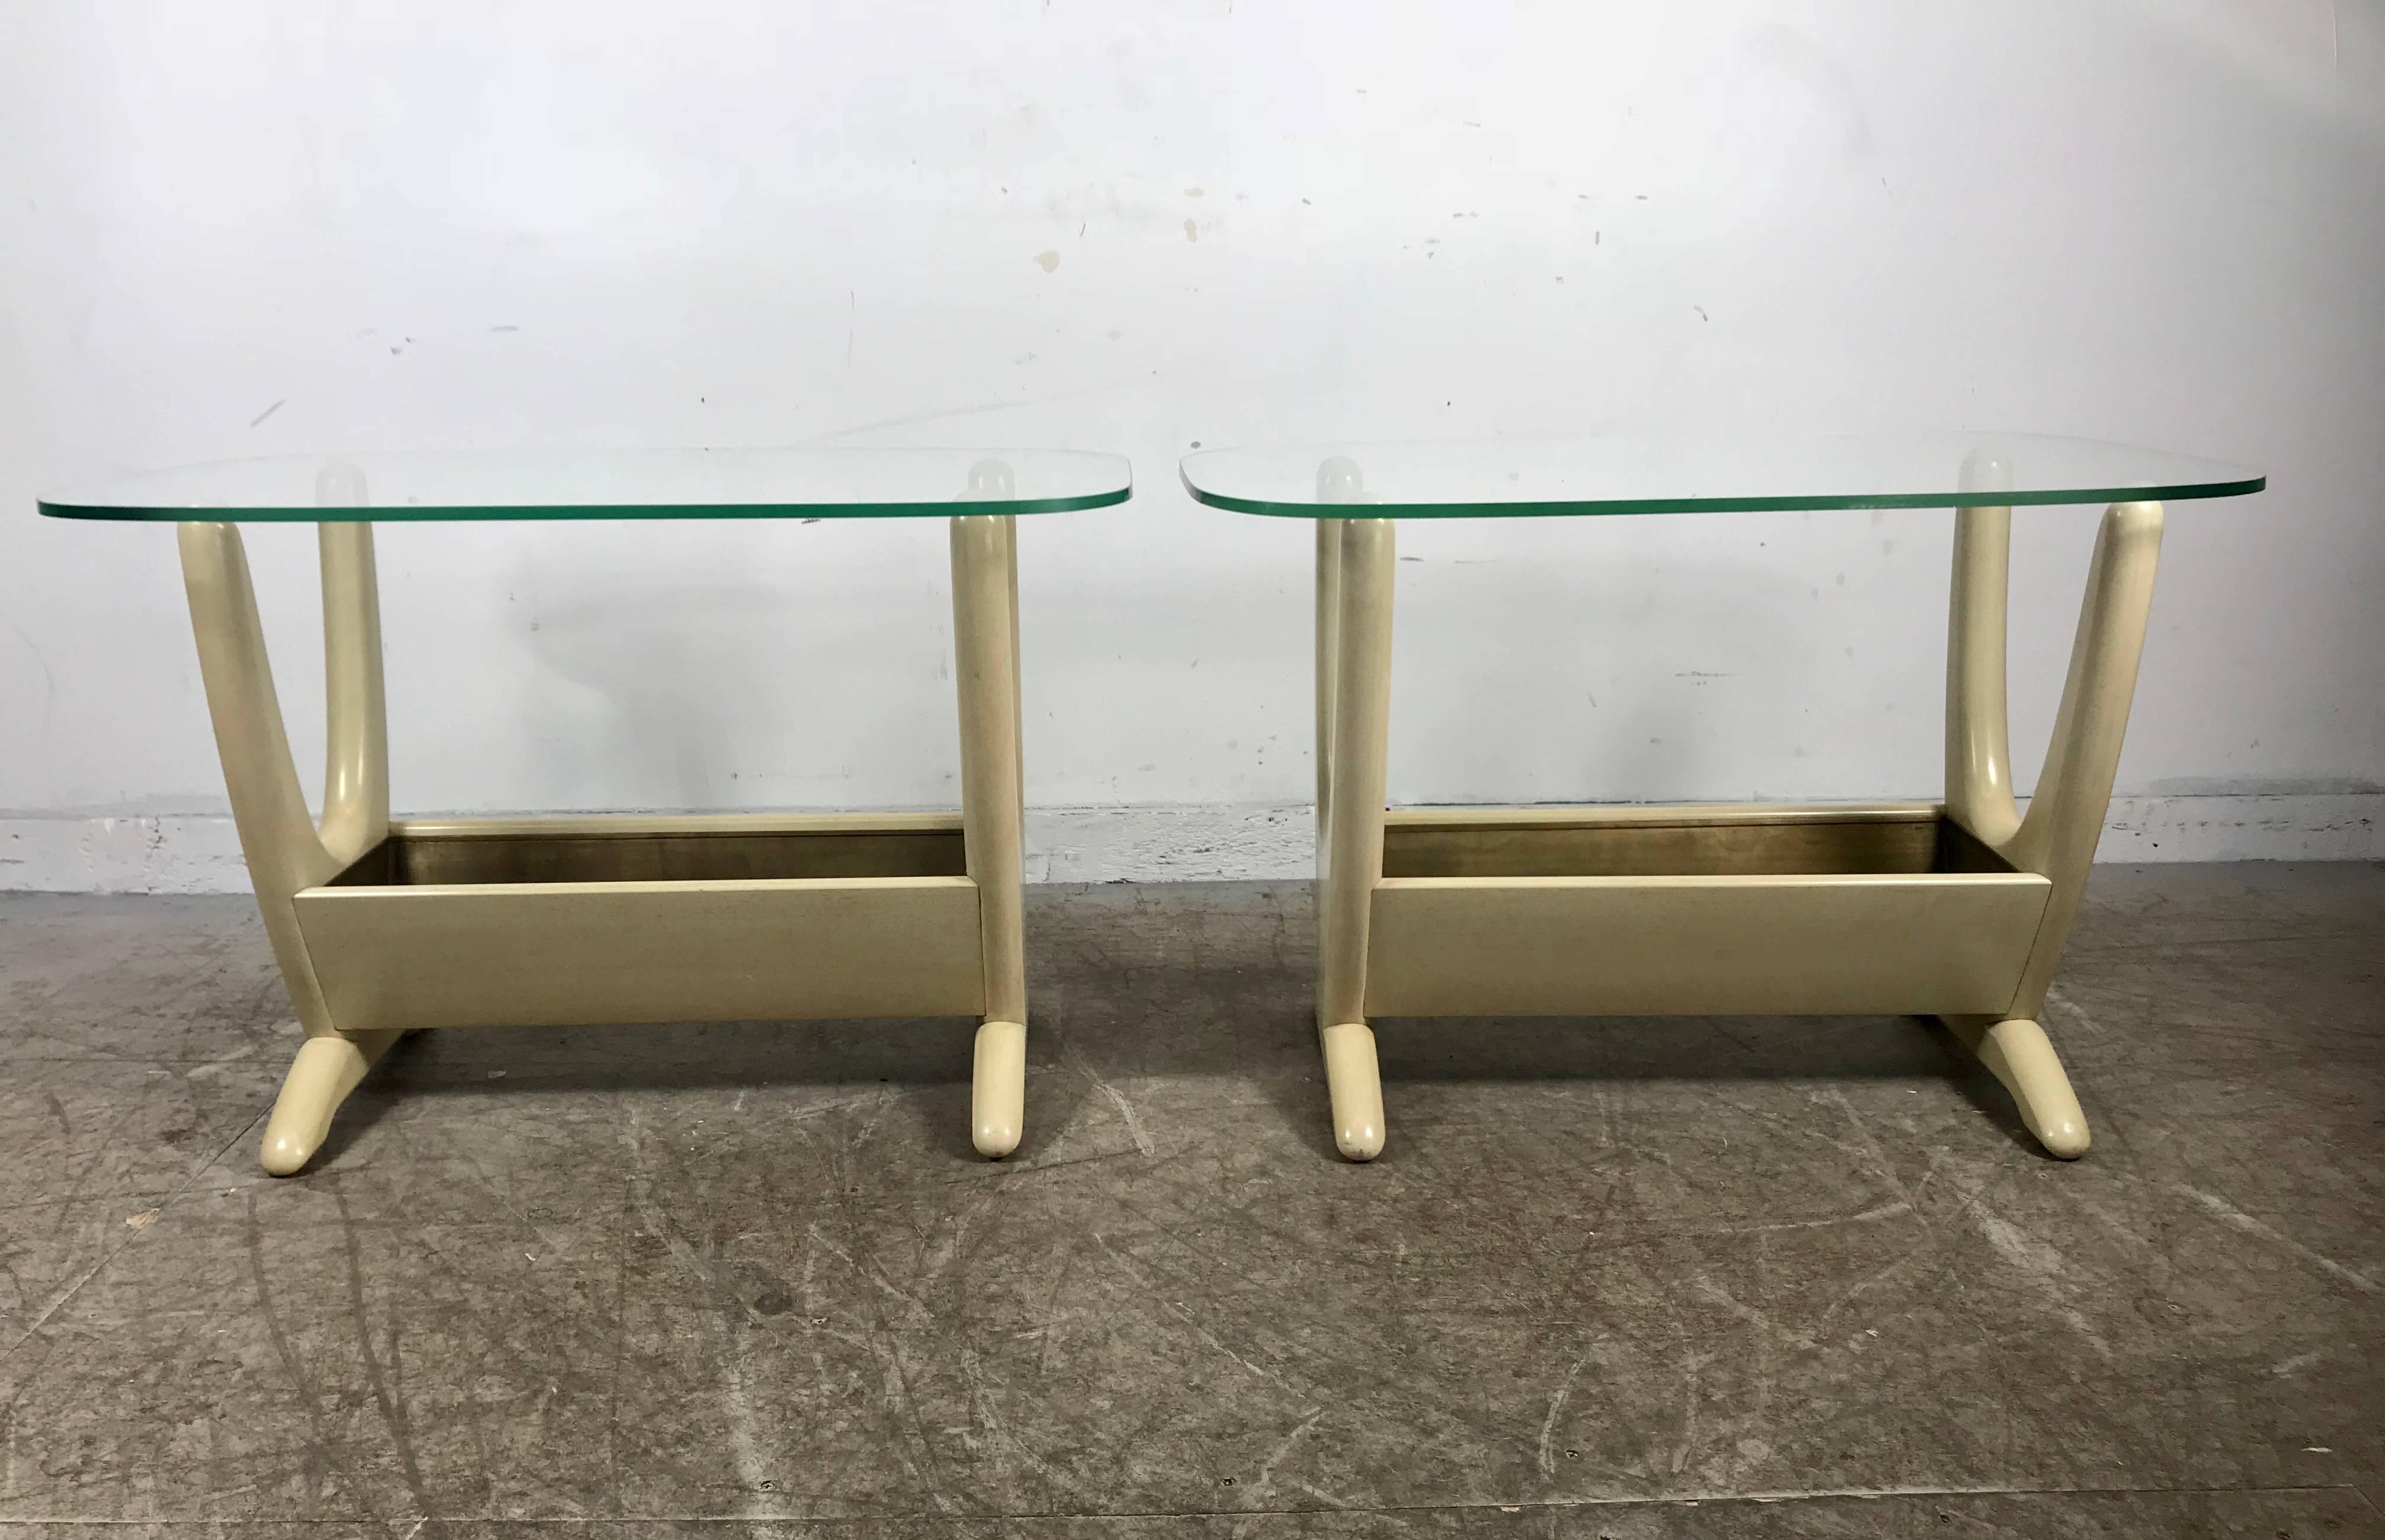 Pair of midcentury end tables with planters by Adrian Pearsall, retain original cream lacquer finish as well as original copper planters.